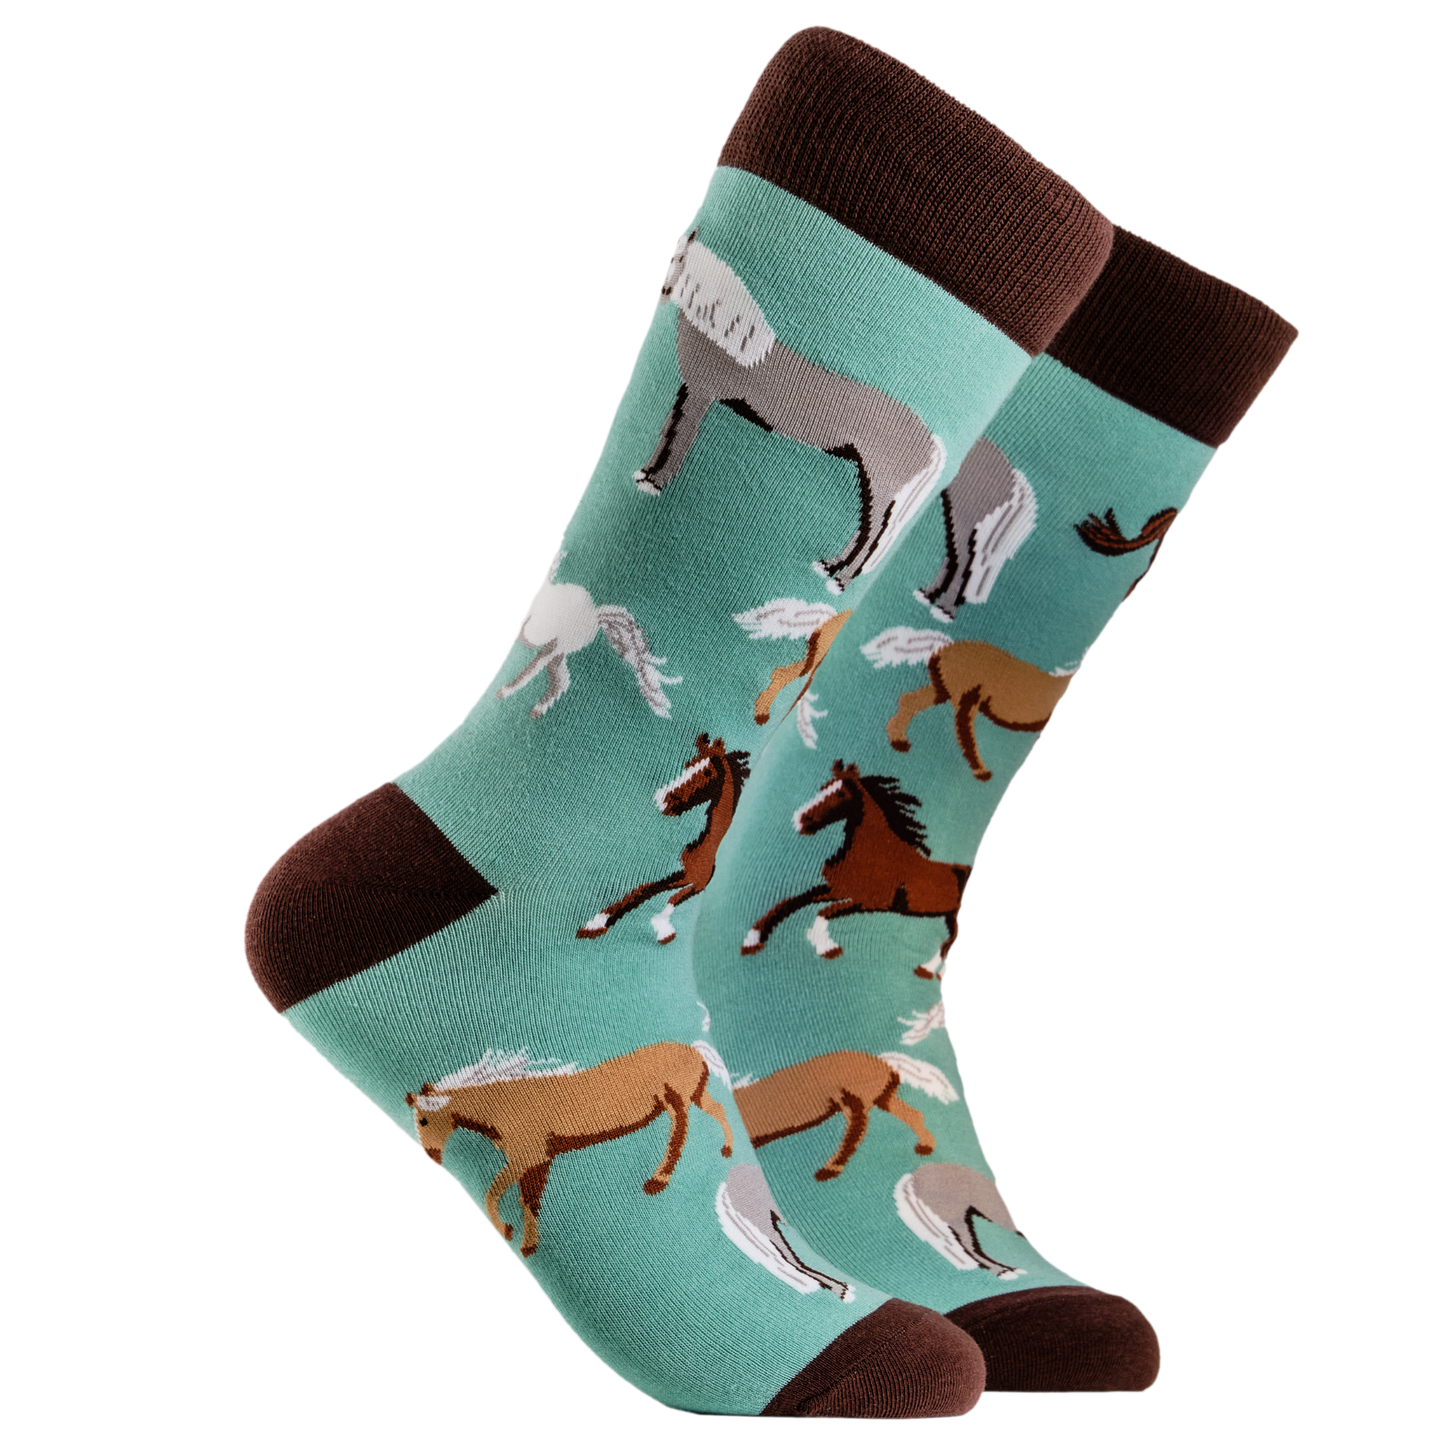 Horse Socks. A pair of socks depicting horses. Turquoise legs, brown cuff, heel and toe.